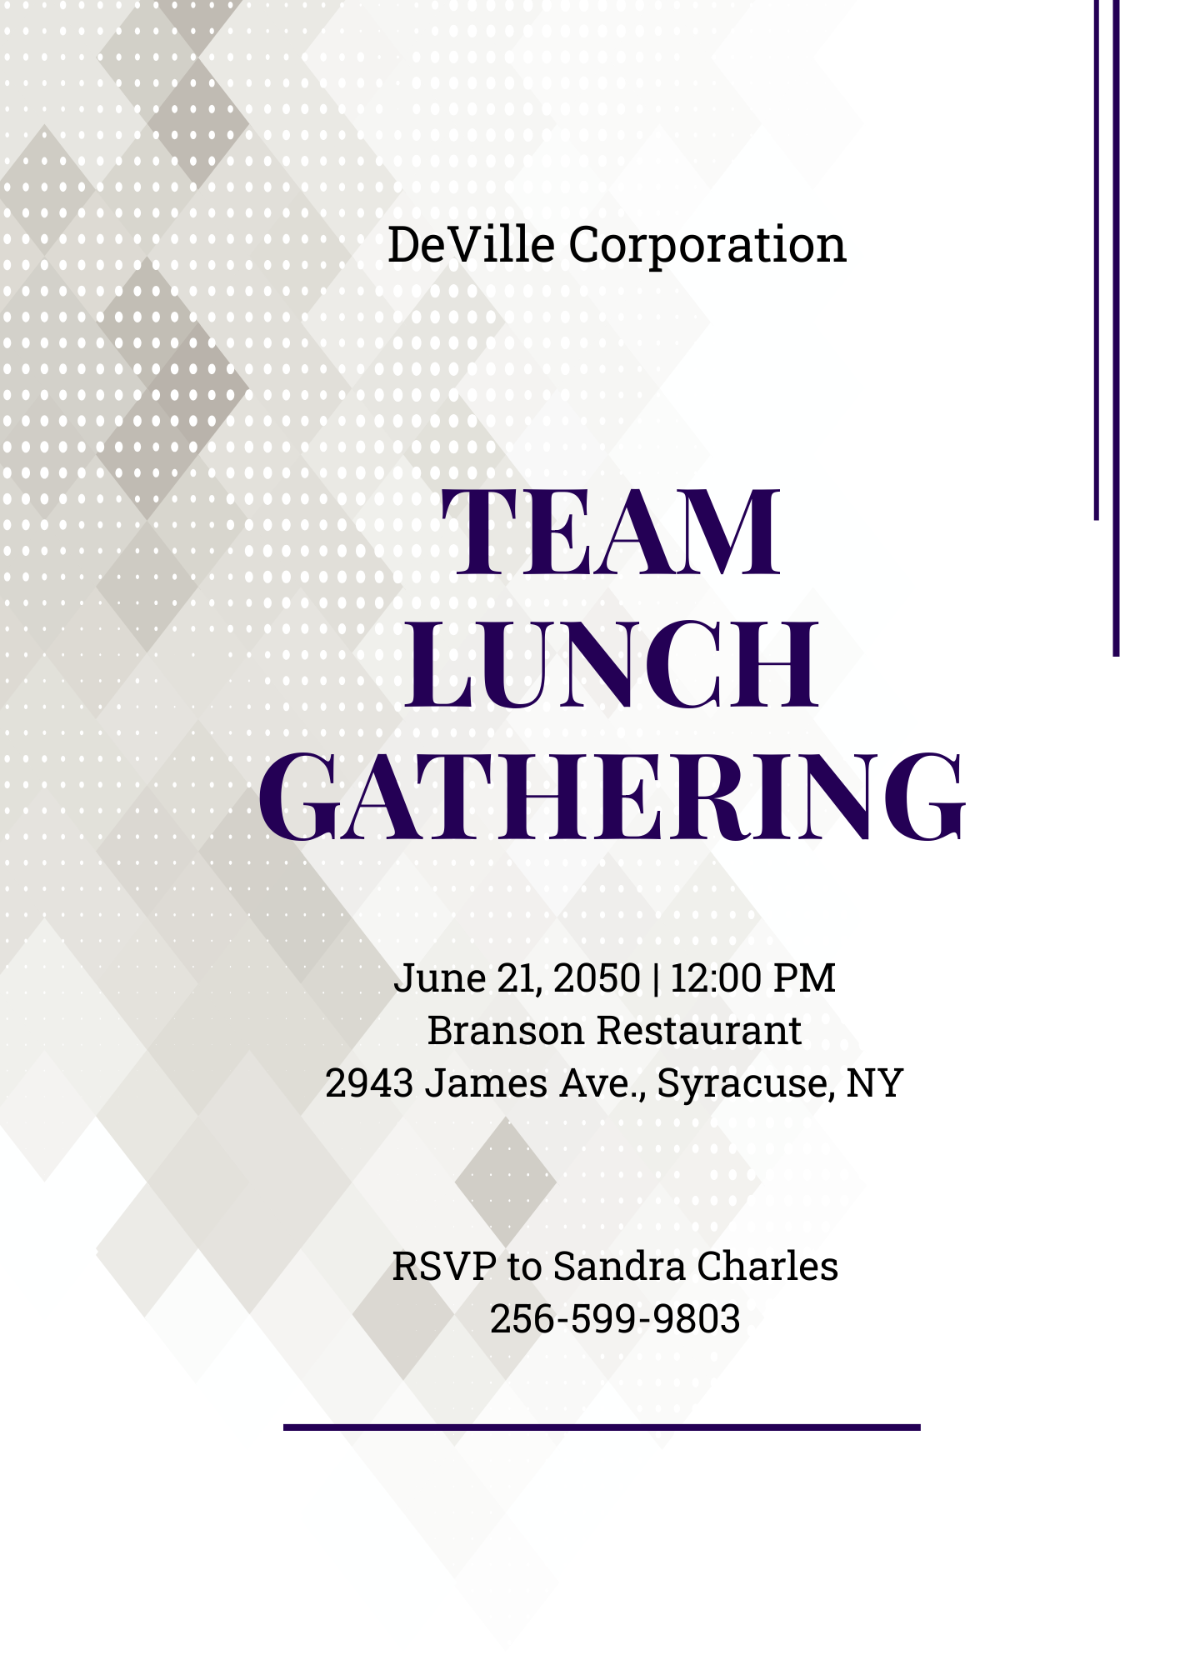 Free Team Lunch Invitation Template